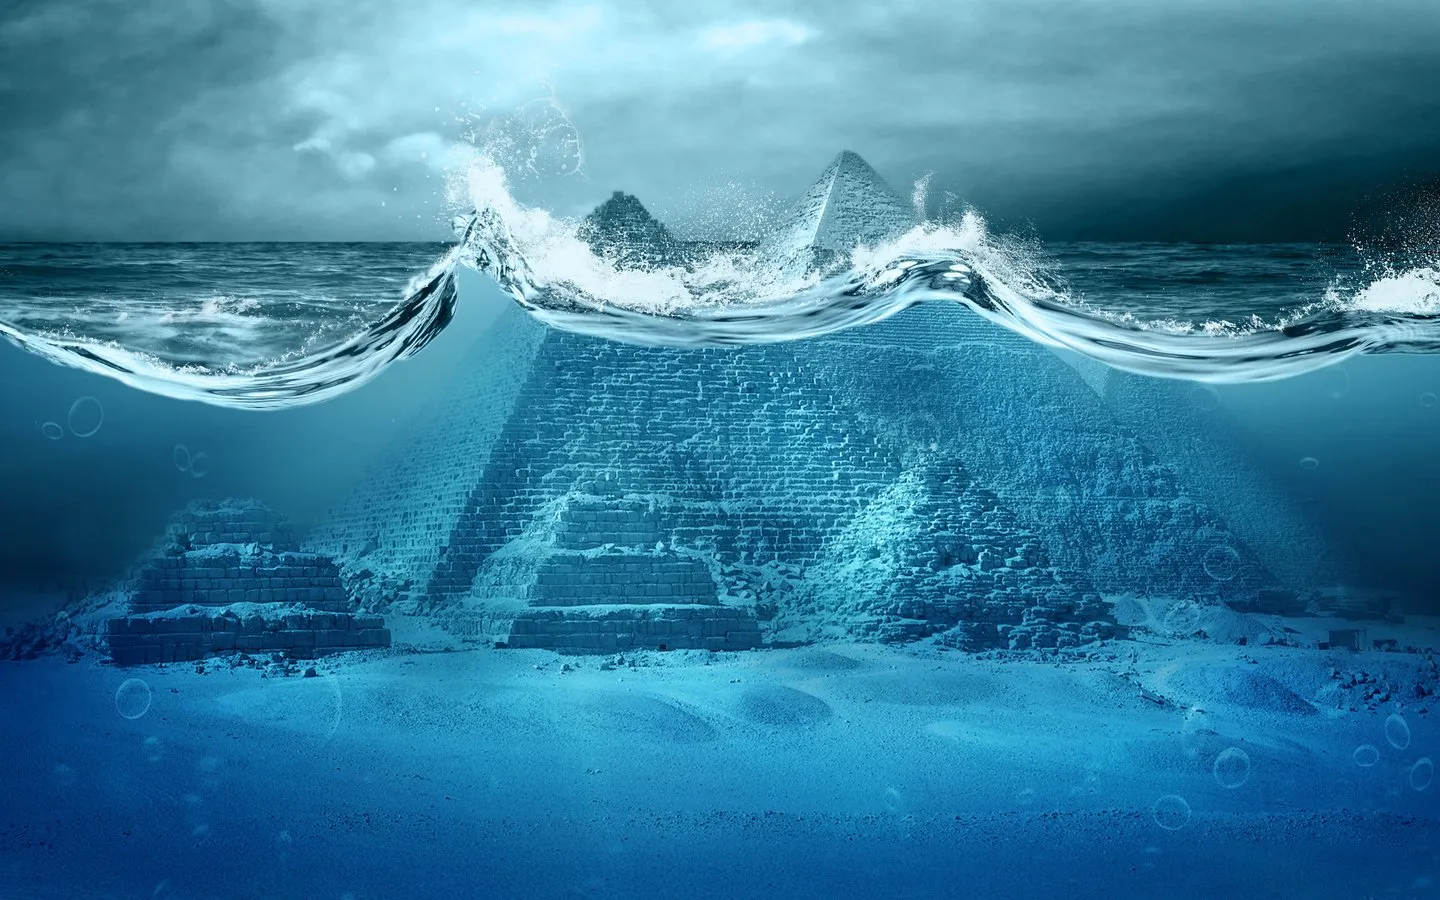 Antediluvian The Pyramids of Giza were under water for a long time 1